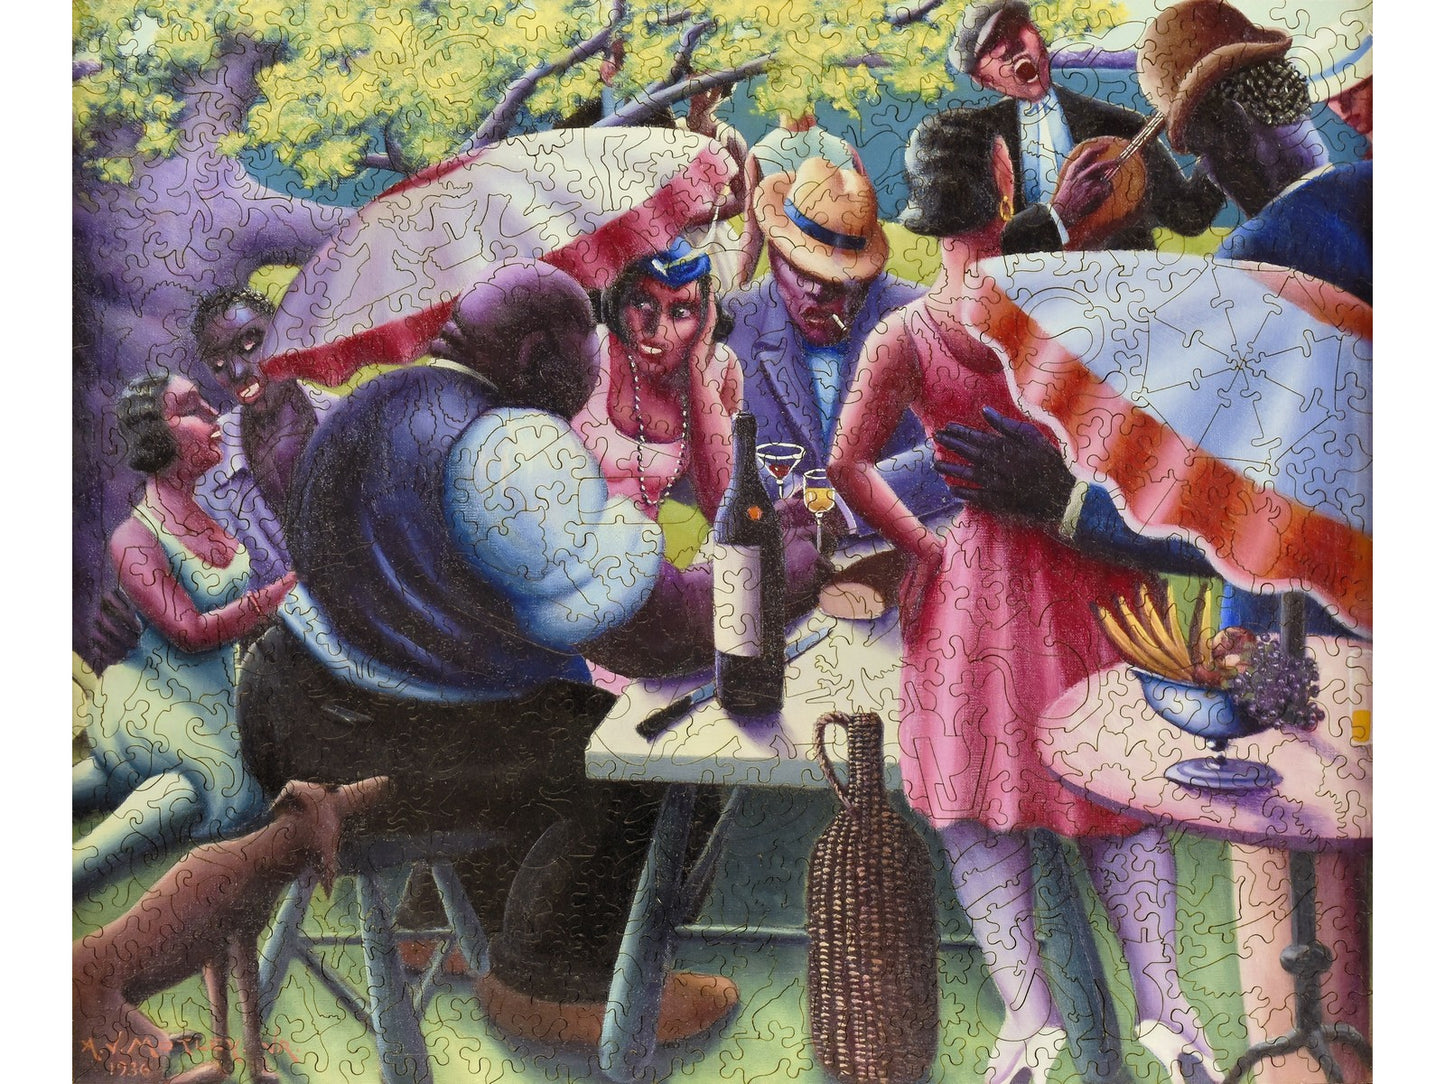 The front of the puzzle, The Picnic, with people enjoying a picnic while holding umbrellas.